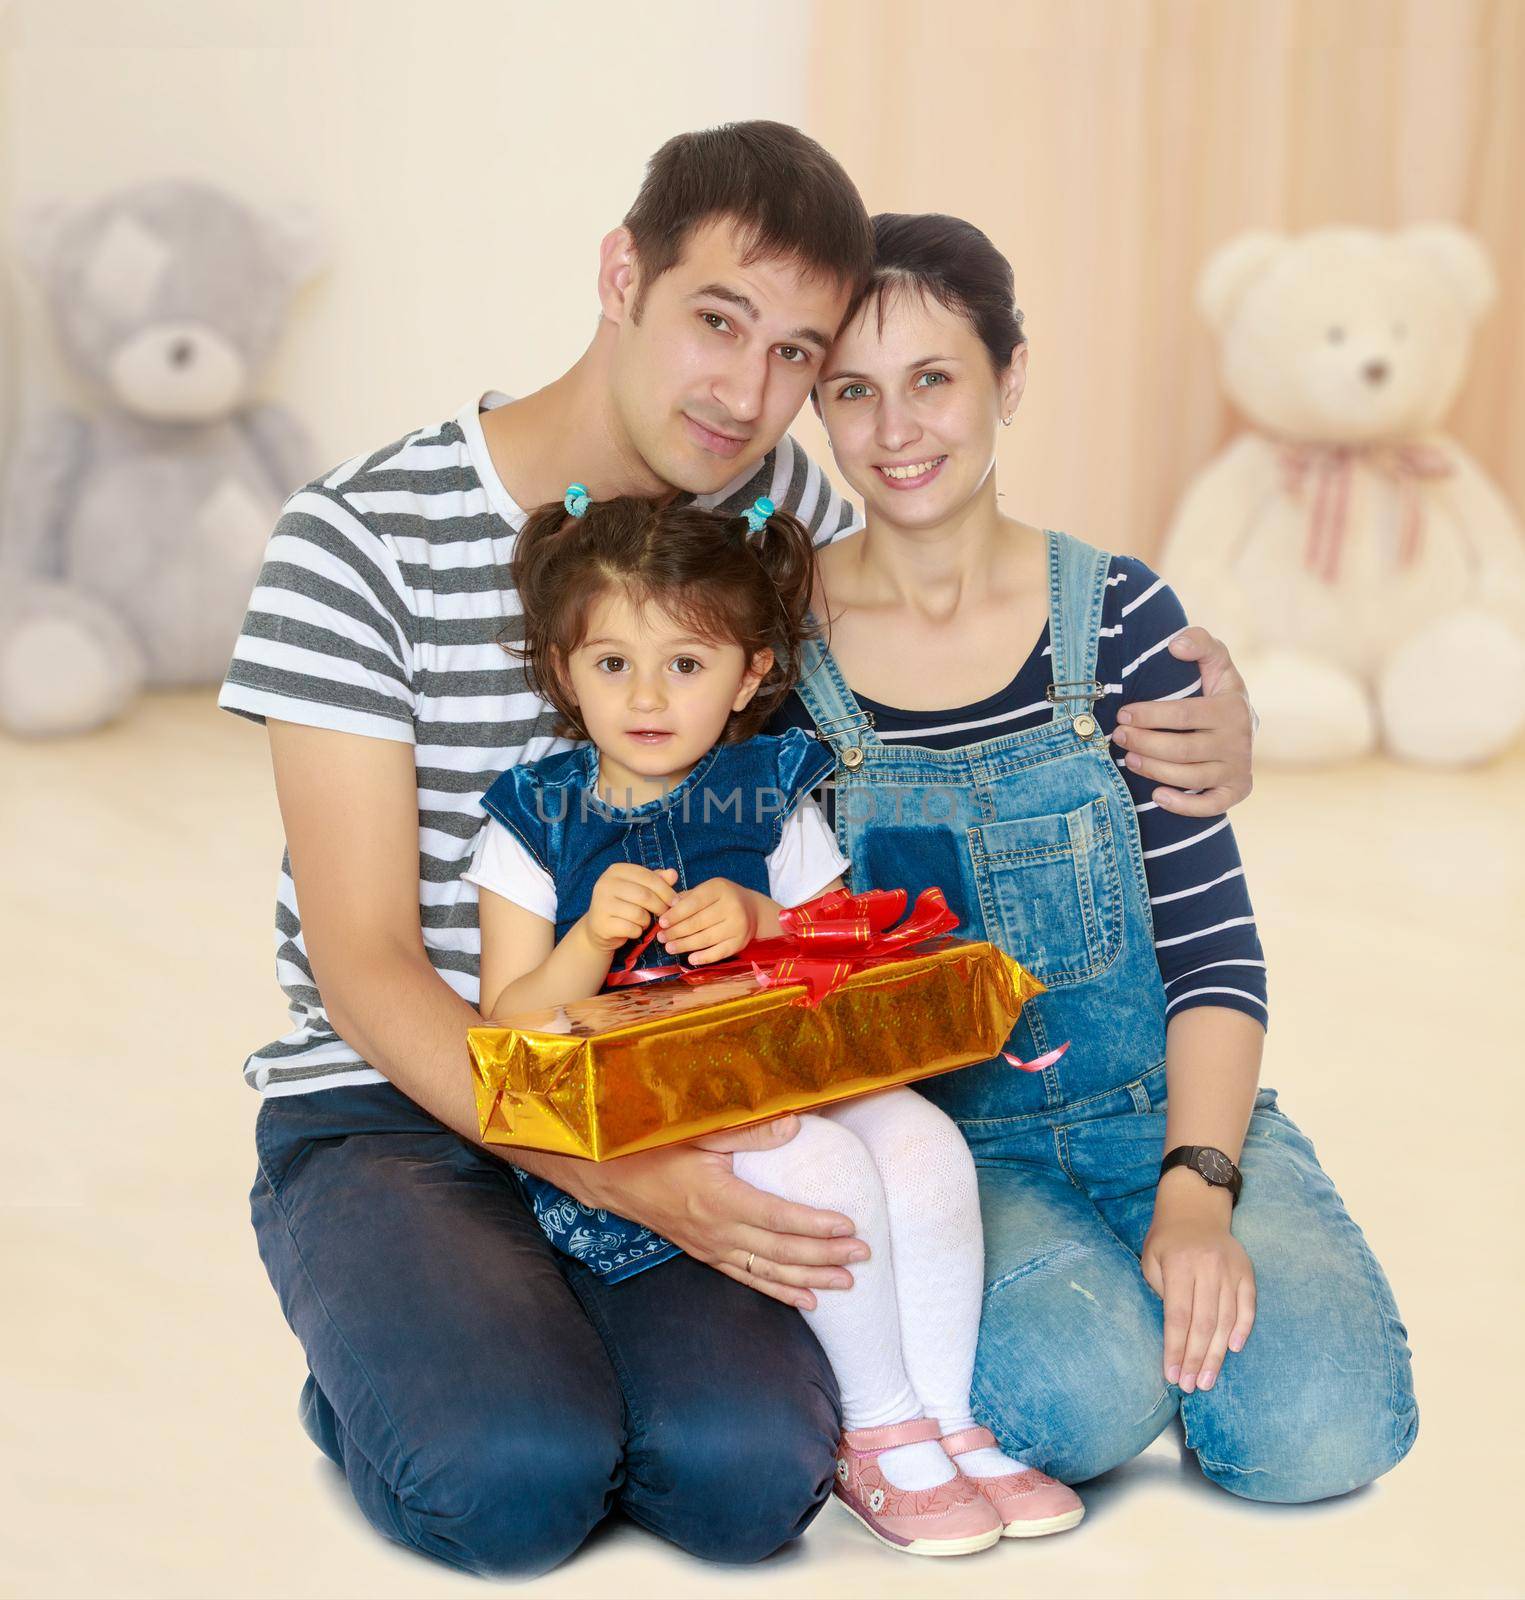 Happy young family with little daughter cuddling together in celebration of Christmas.In the children's room in which sits a Teddy bear.